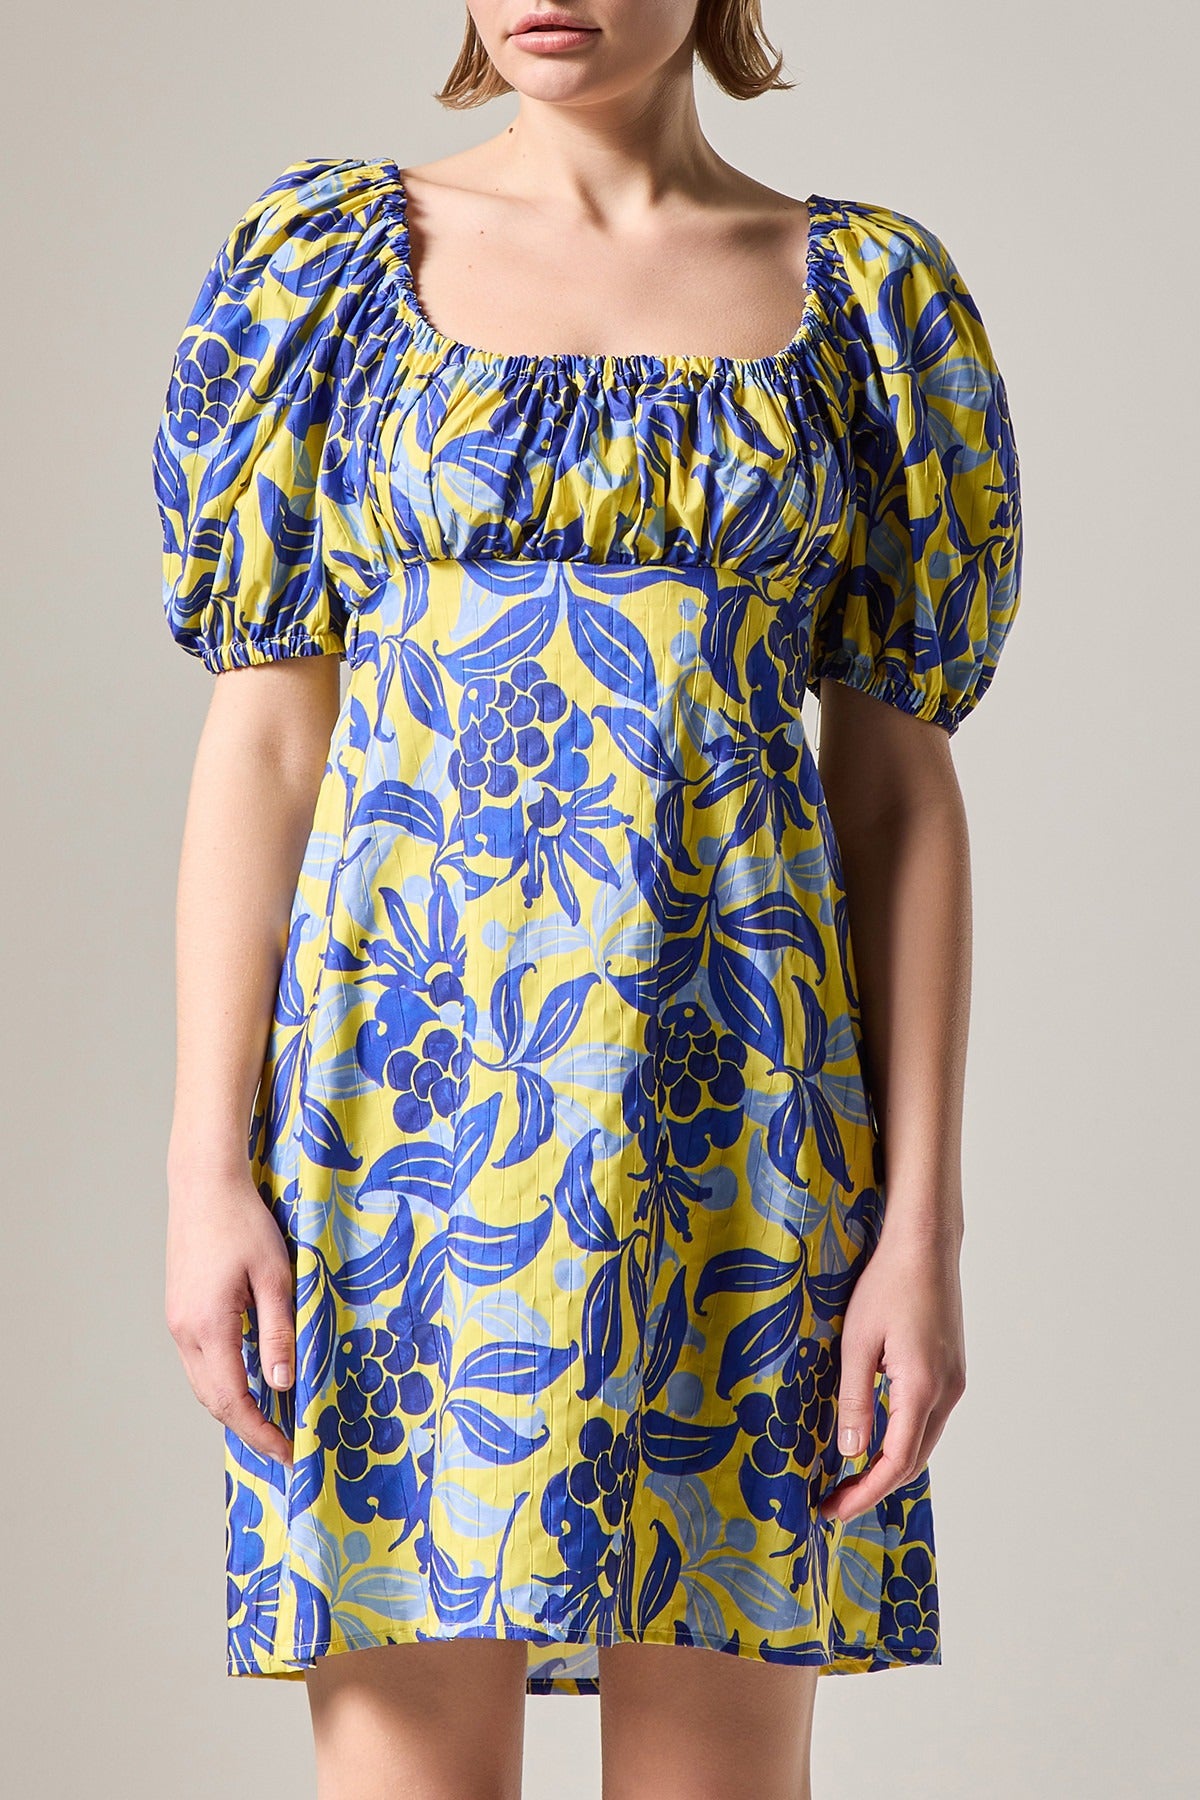 BLUE AND YELLOW GIALLO DRESS